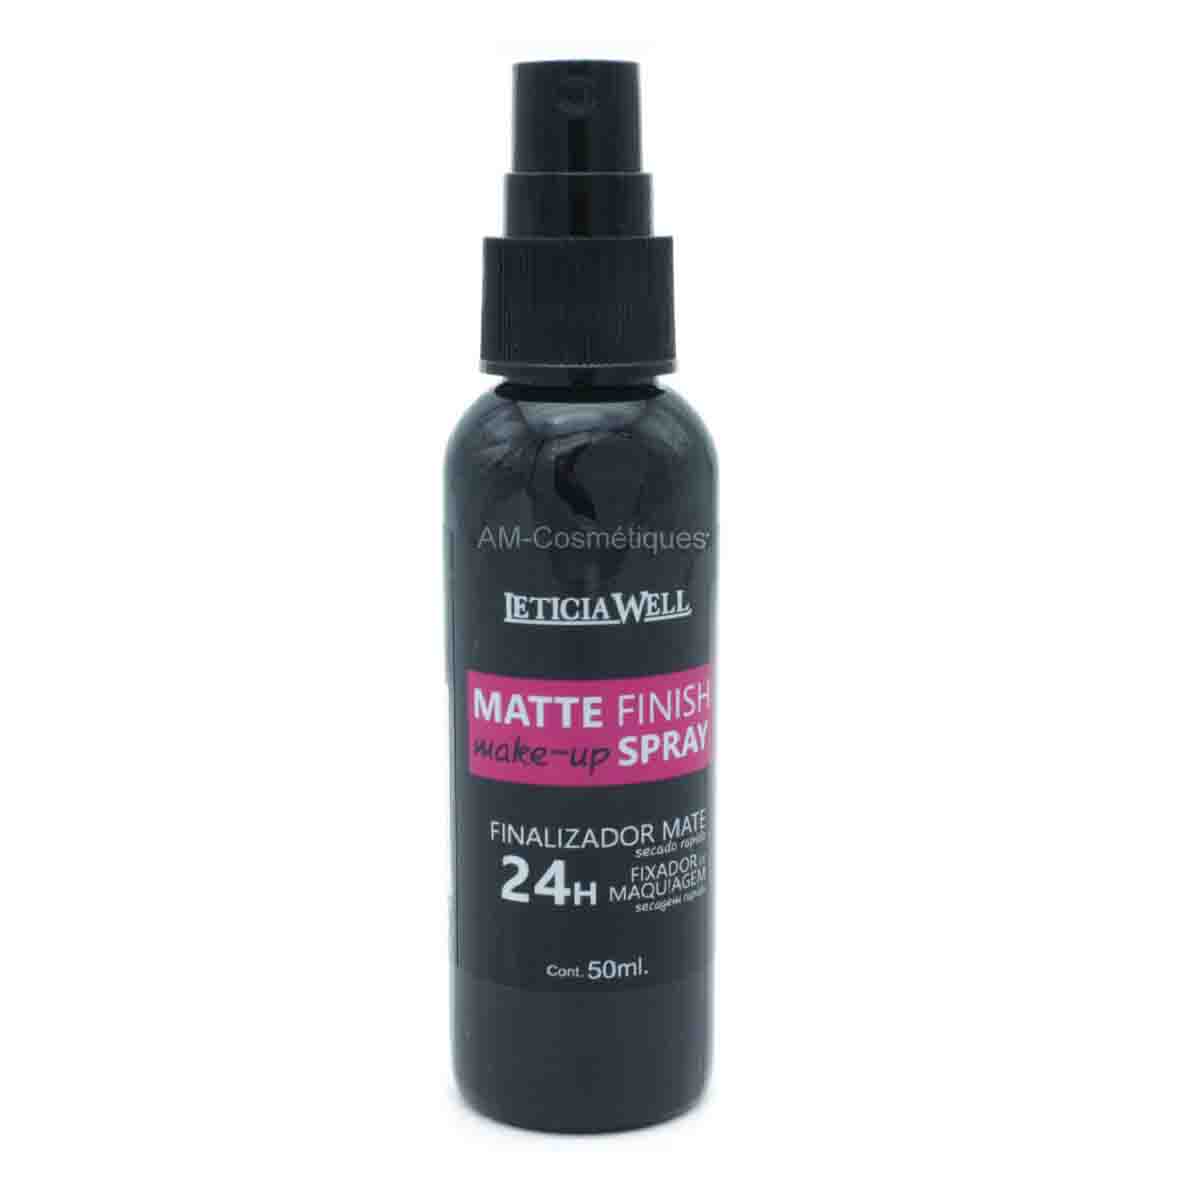  Matte Finish Make-up spray fixateur après maquillage Leticia Well